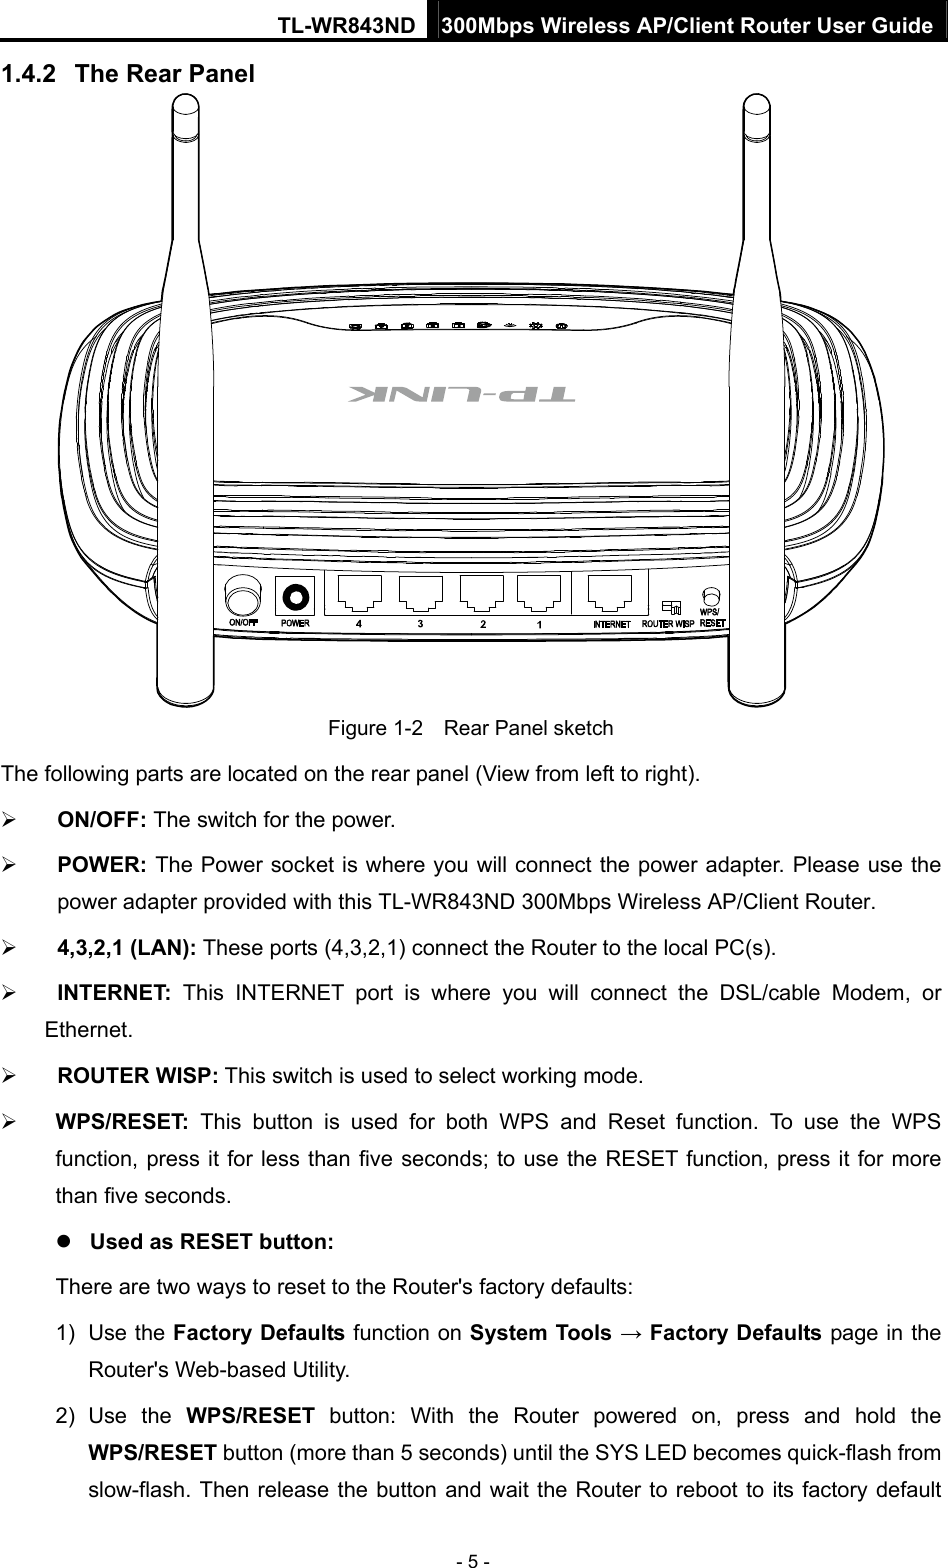 TL-WR843ND 300Mbps Wireless AP/Client Router User Guide - 5 - 1.4.2  The Rear Panel  Figure 1-2    Rear Panel sketch The following parts are located on the rear panel (View from left to right).  ON/OFF: The switch for the power.  POWER: The Power socket is where you will connect the power adapter. Please use the power adapter provided with this TL-WR843ND 300Mbps Wireless AP/Client Router.  4,3,2,1 (LAN): These ports (4,3,2,1) connect the Router to the local PC(s).  INTERNET: This INTERNET port is where you will connect the DSL/cable Modem, or Ethernet.  ROUTER WISP: This switch is used to select working mode.  WPS/RESET:  This button is used for both WPS and Reset function. To use the WPS function, press it for less than five seconds; to use the RESET function, press it for more than five seconds.    Used as RESET button: There are two ways to reset to the Router&apos;s factory defaults: 1) Use the Factory Defaults function on System Tools → Factory Defaults page in the Router&apos;s Web-based Utility. 2) Use the WPS/RESET button: With the Router powered on, press and hold the WPS/RESET button (more than 5 seconds) until the SYS LED becomes quick-flash from slow-flash. Then release the button and wait the Router to reboot to its factory default 